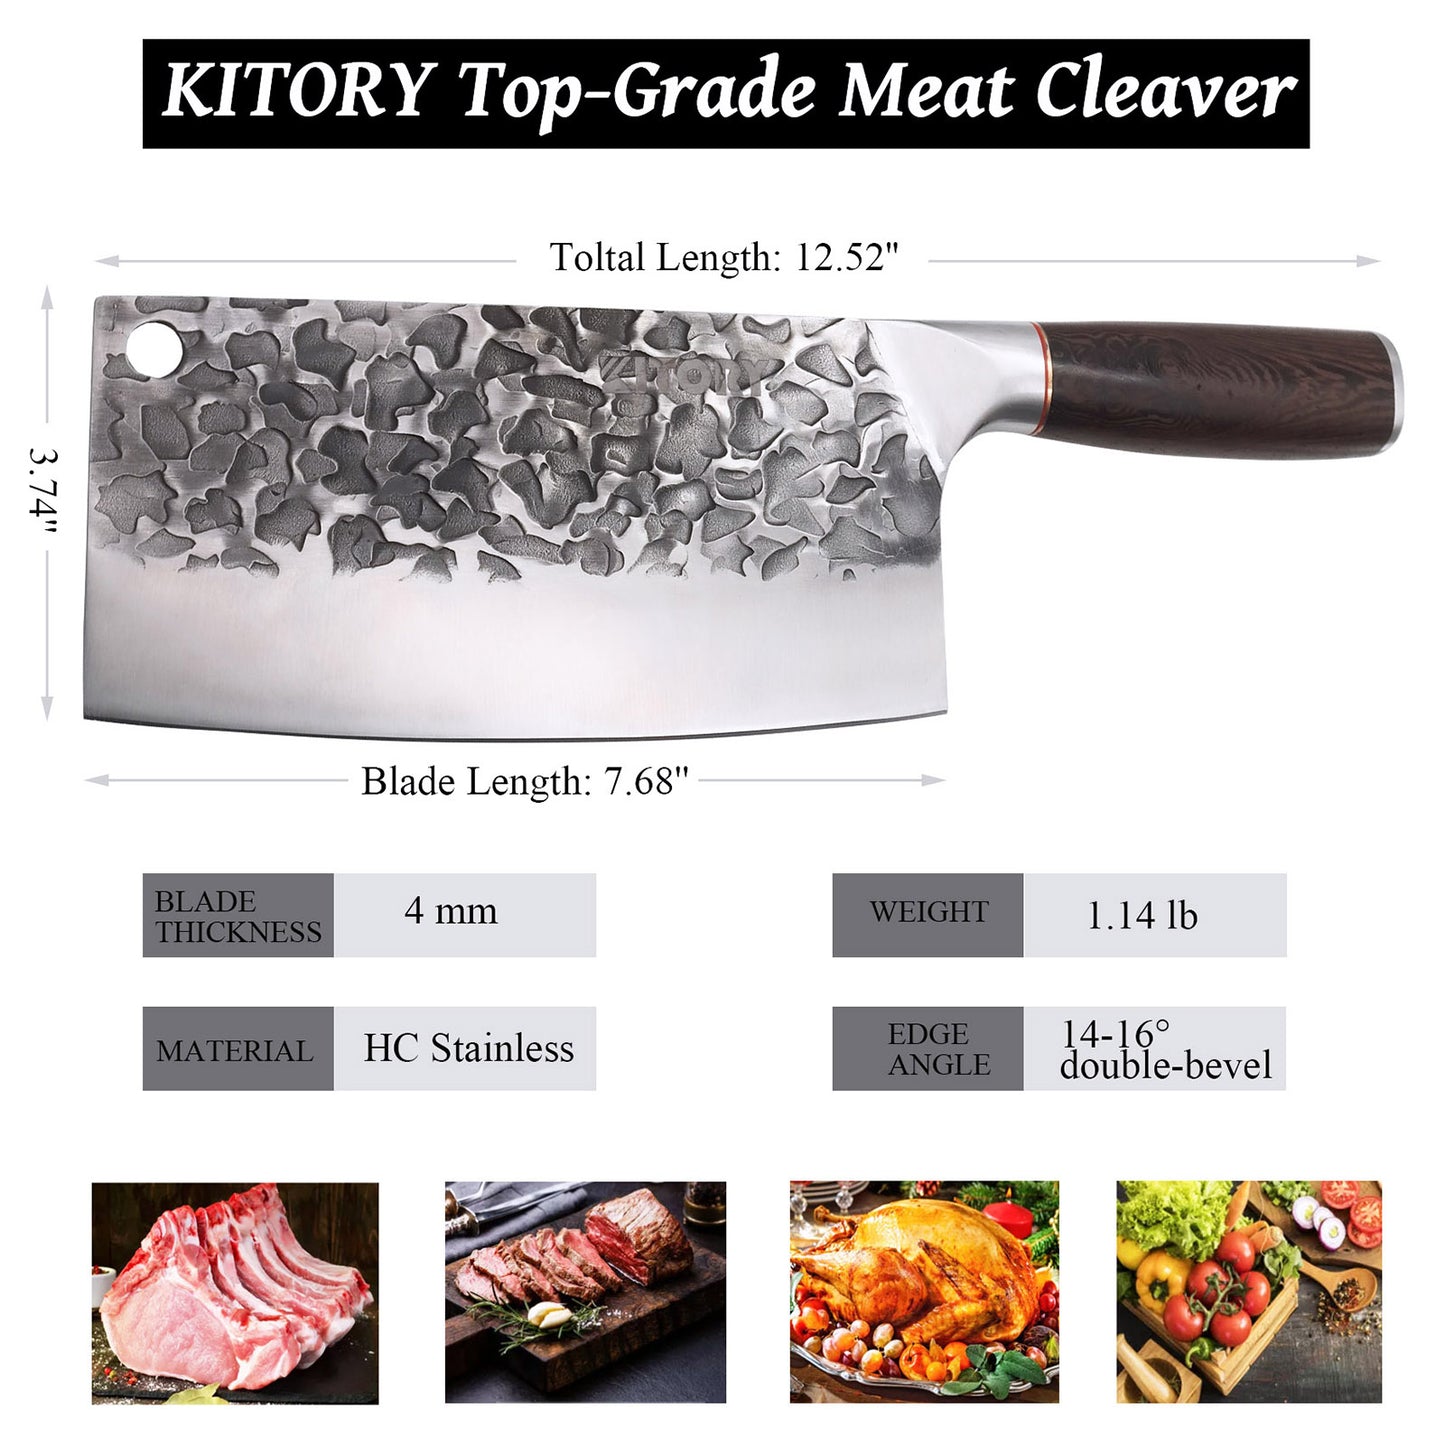 Kitory Meat Cleaver 7.5 Inch High Carbon Steel Wenge Wood Handle